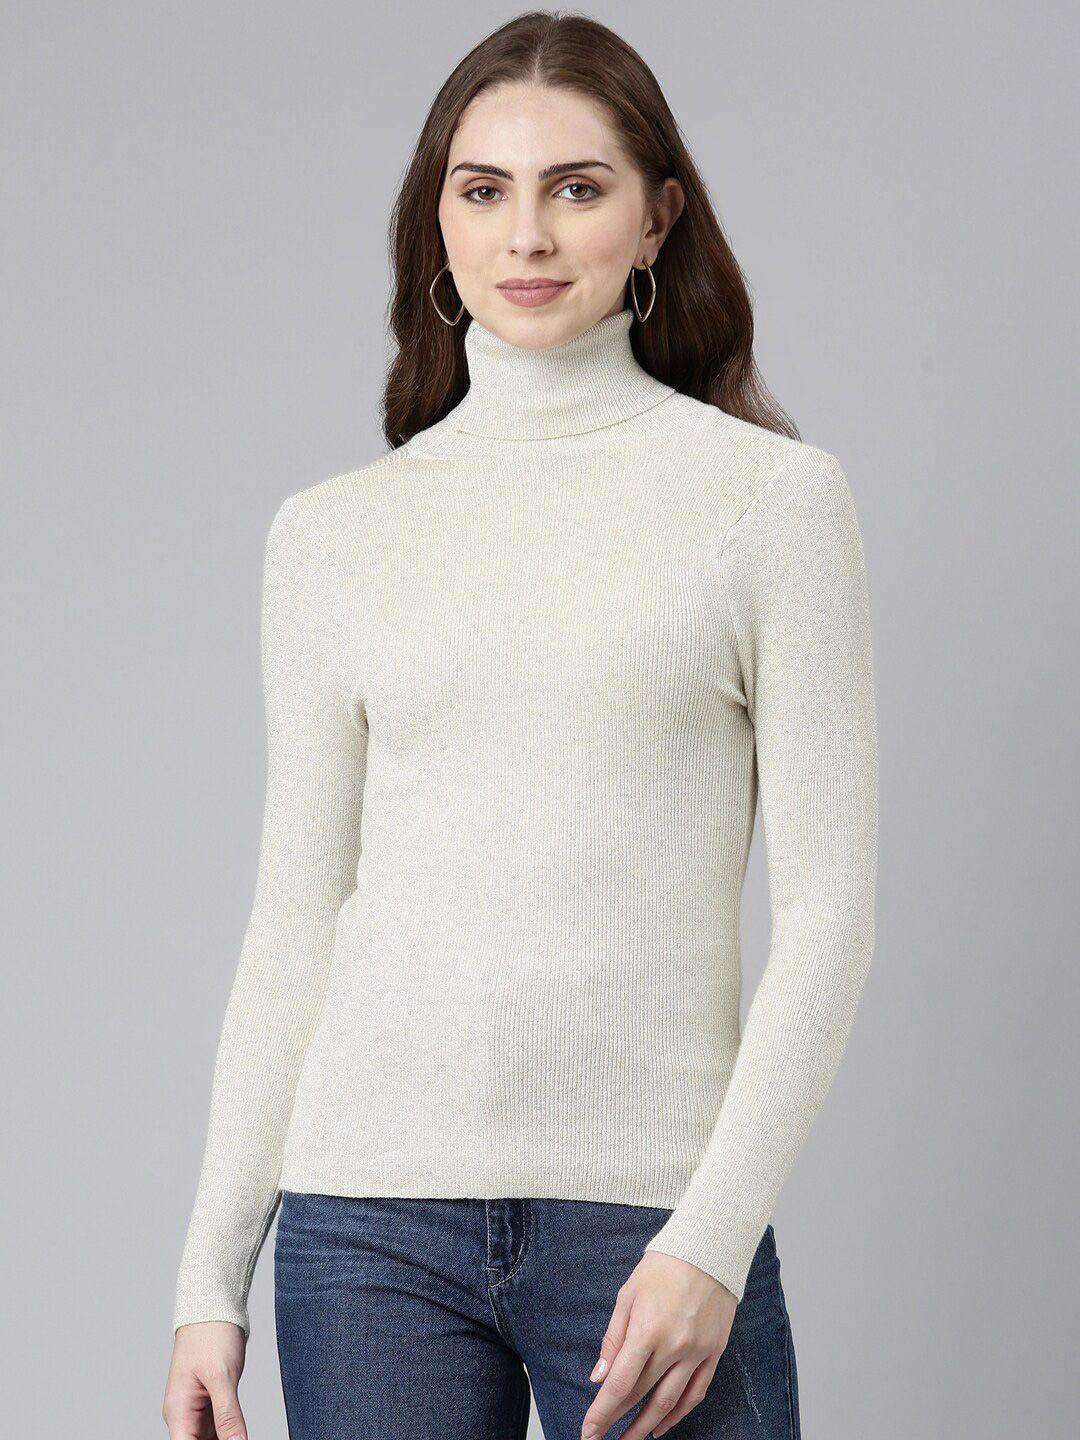 showoff high neck long sleeves fitted top